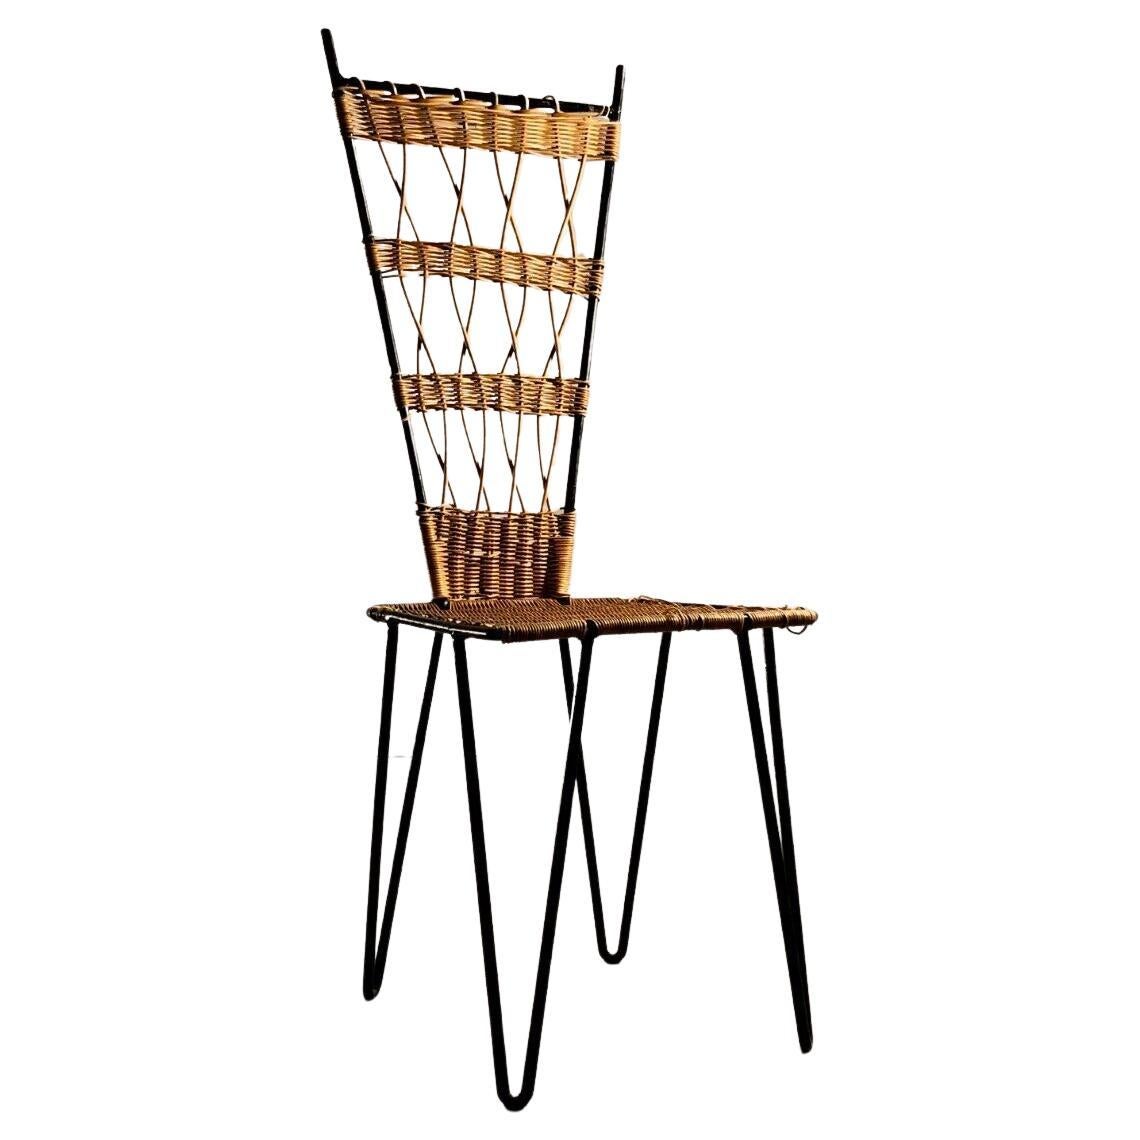 A Sculptural MID-CENTURY-MODERN MODERNIST CHAIR by RAOUL GUYS, France 1950 For Sale